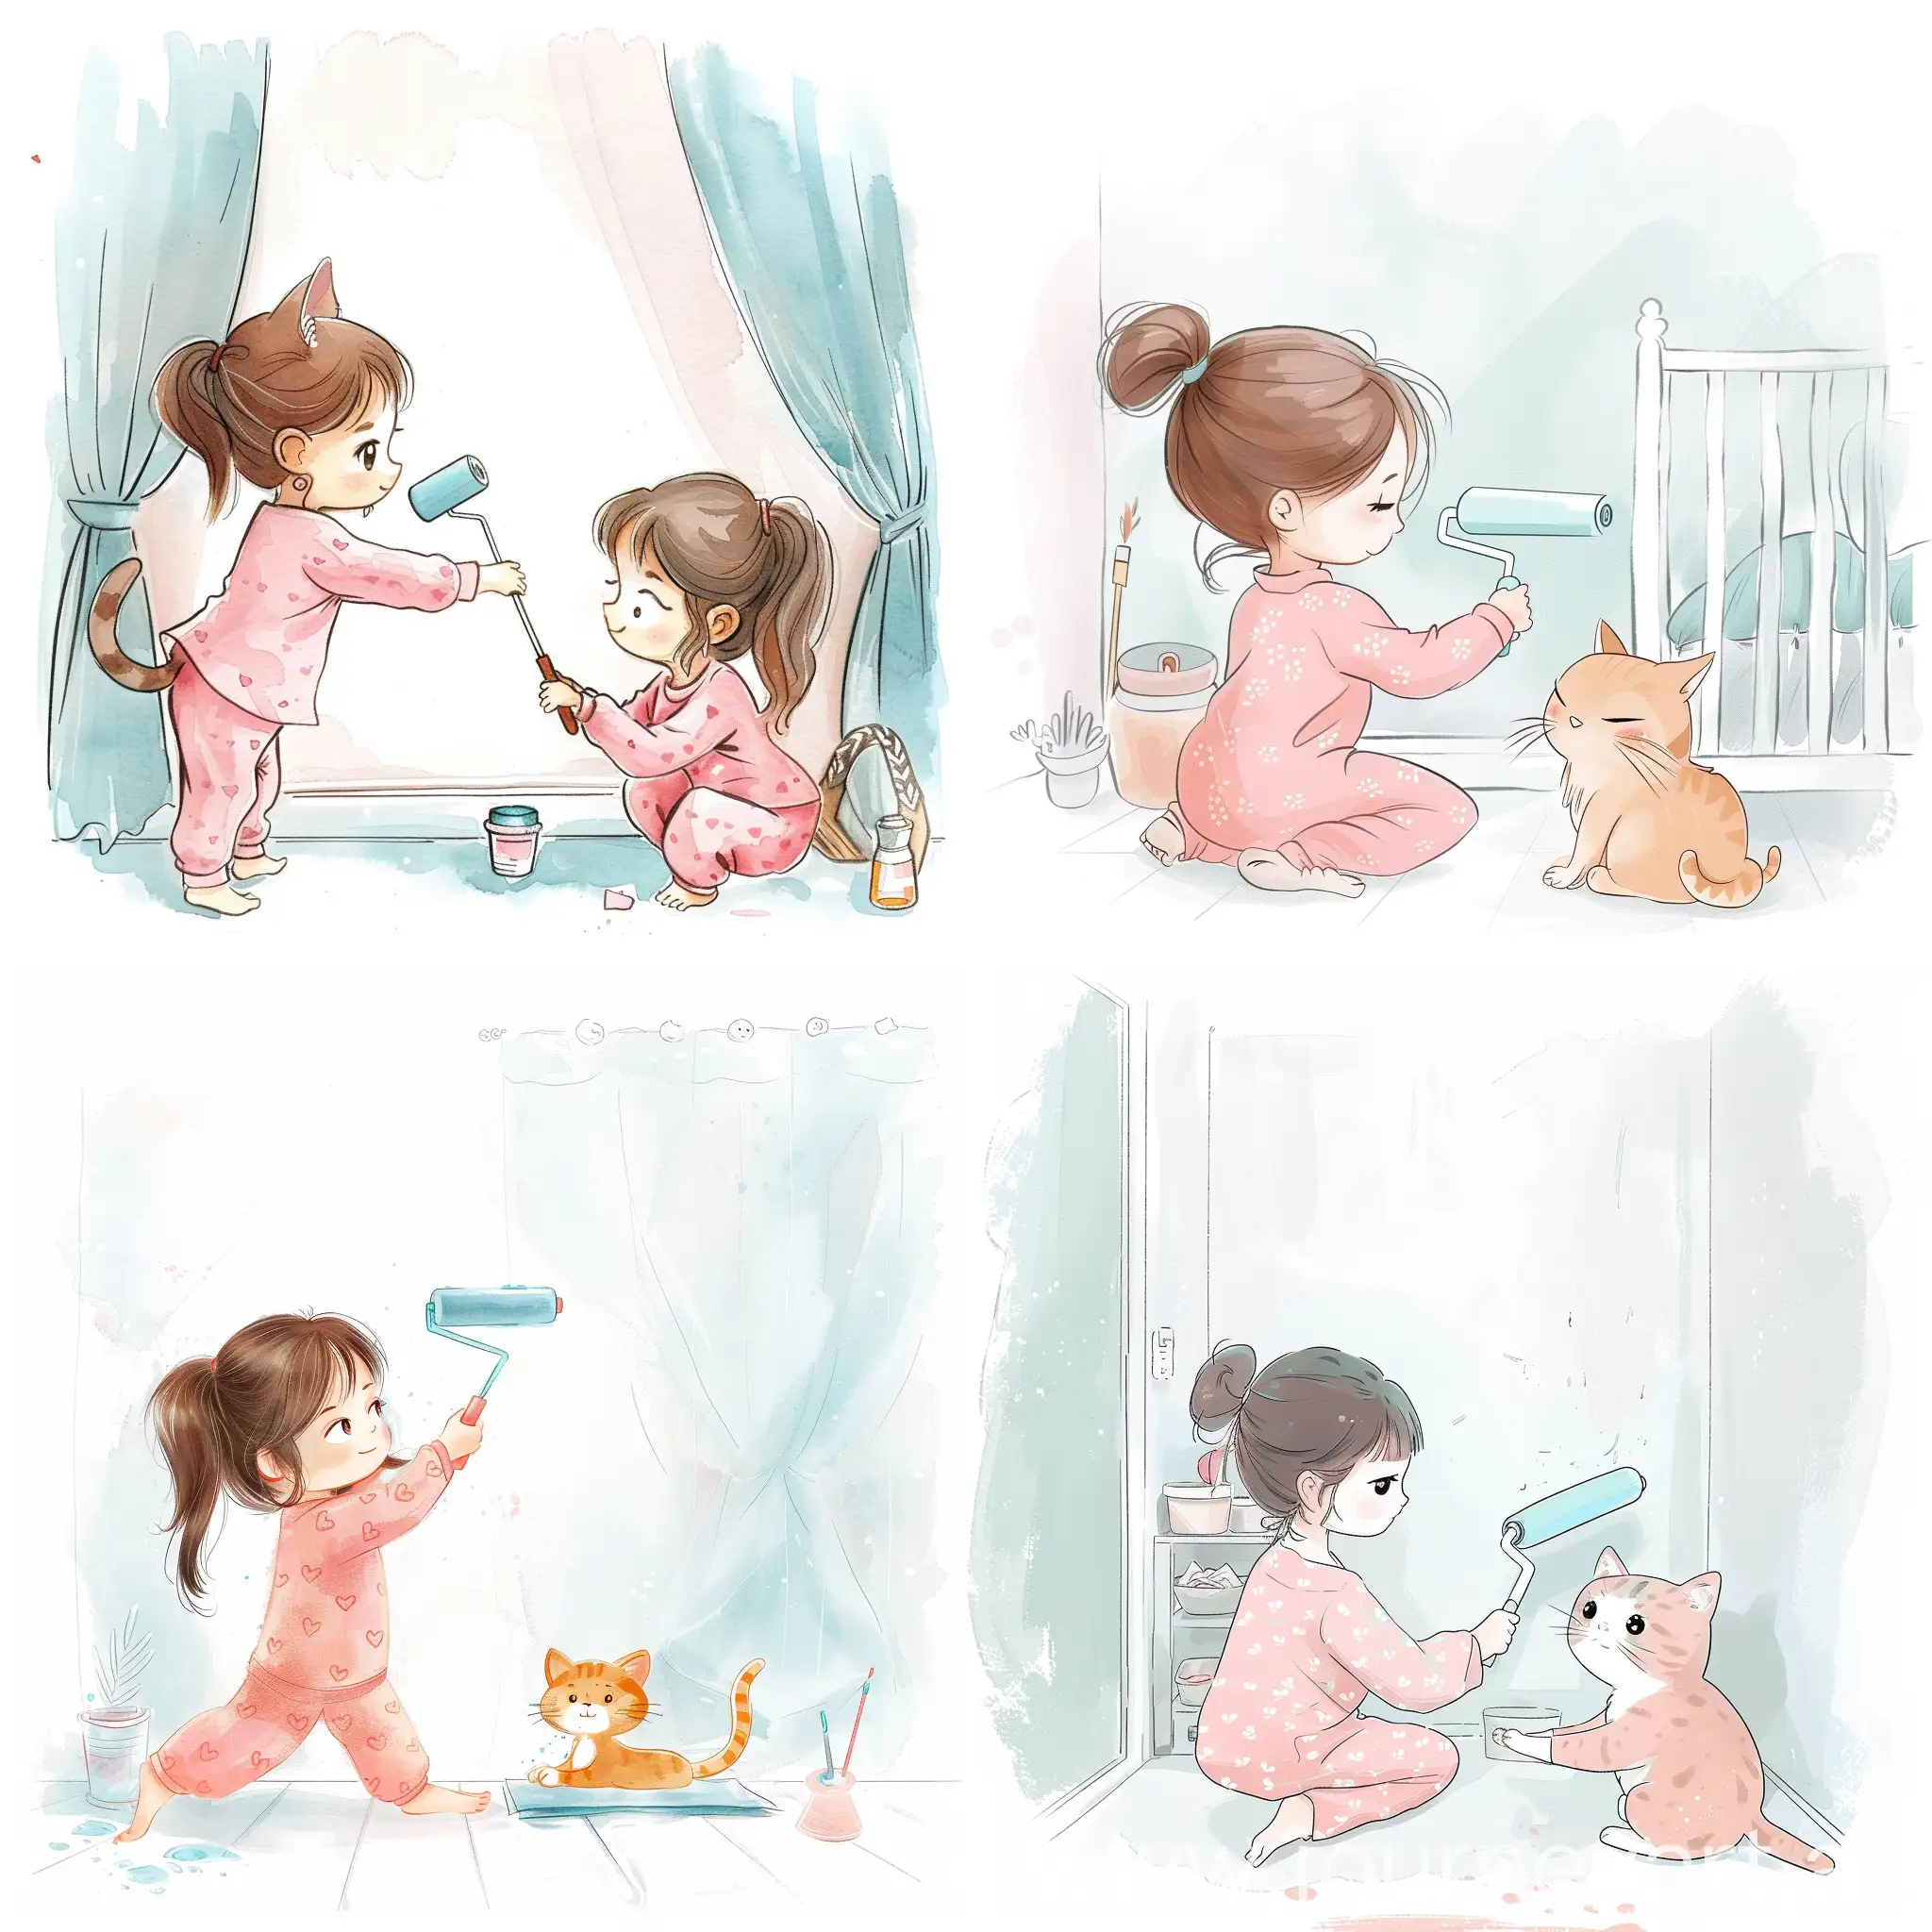 Adorable-Artist-Cat-Painting-a-Dreamy-Wonderland-in-Pink-Pajamas